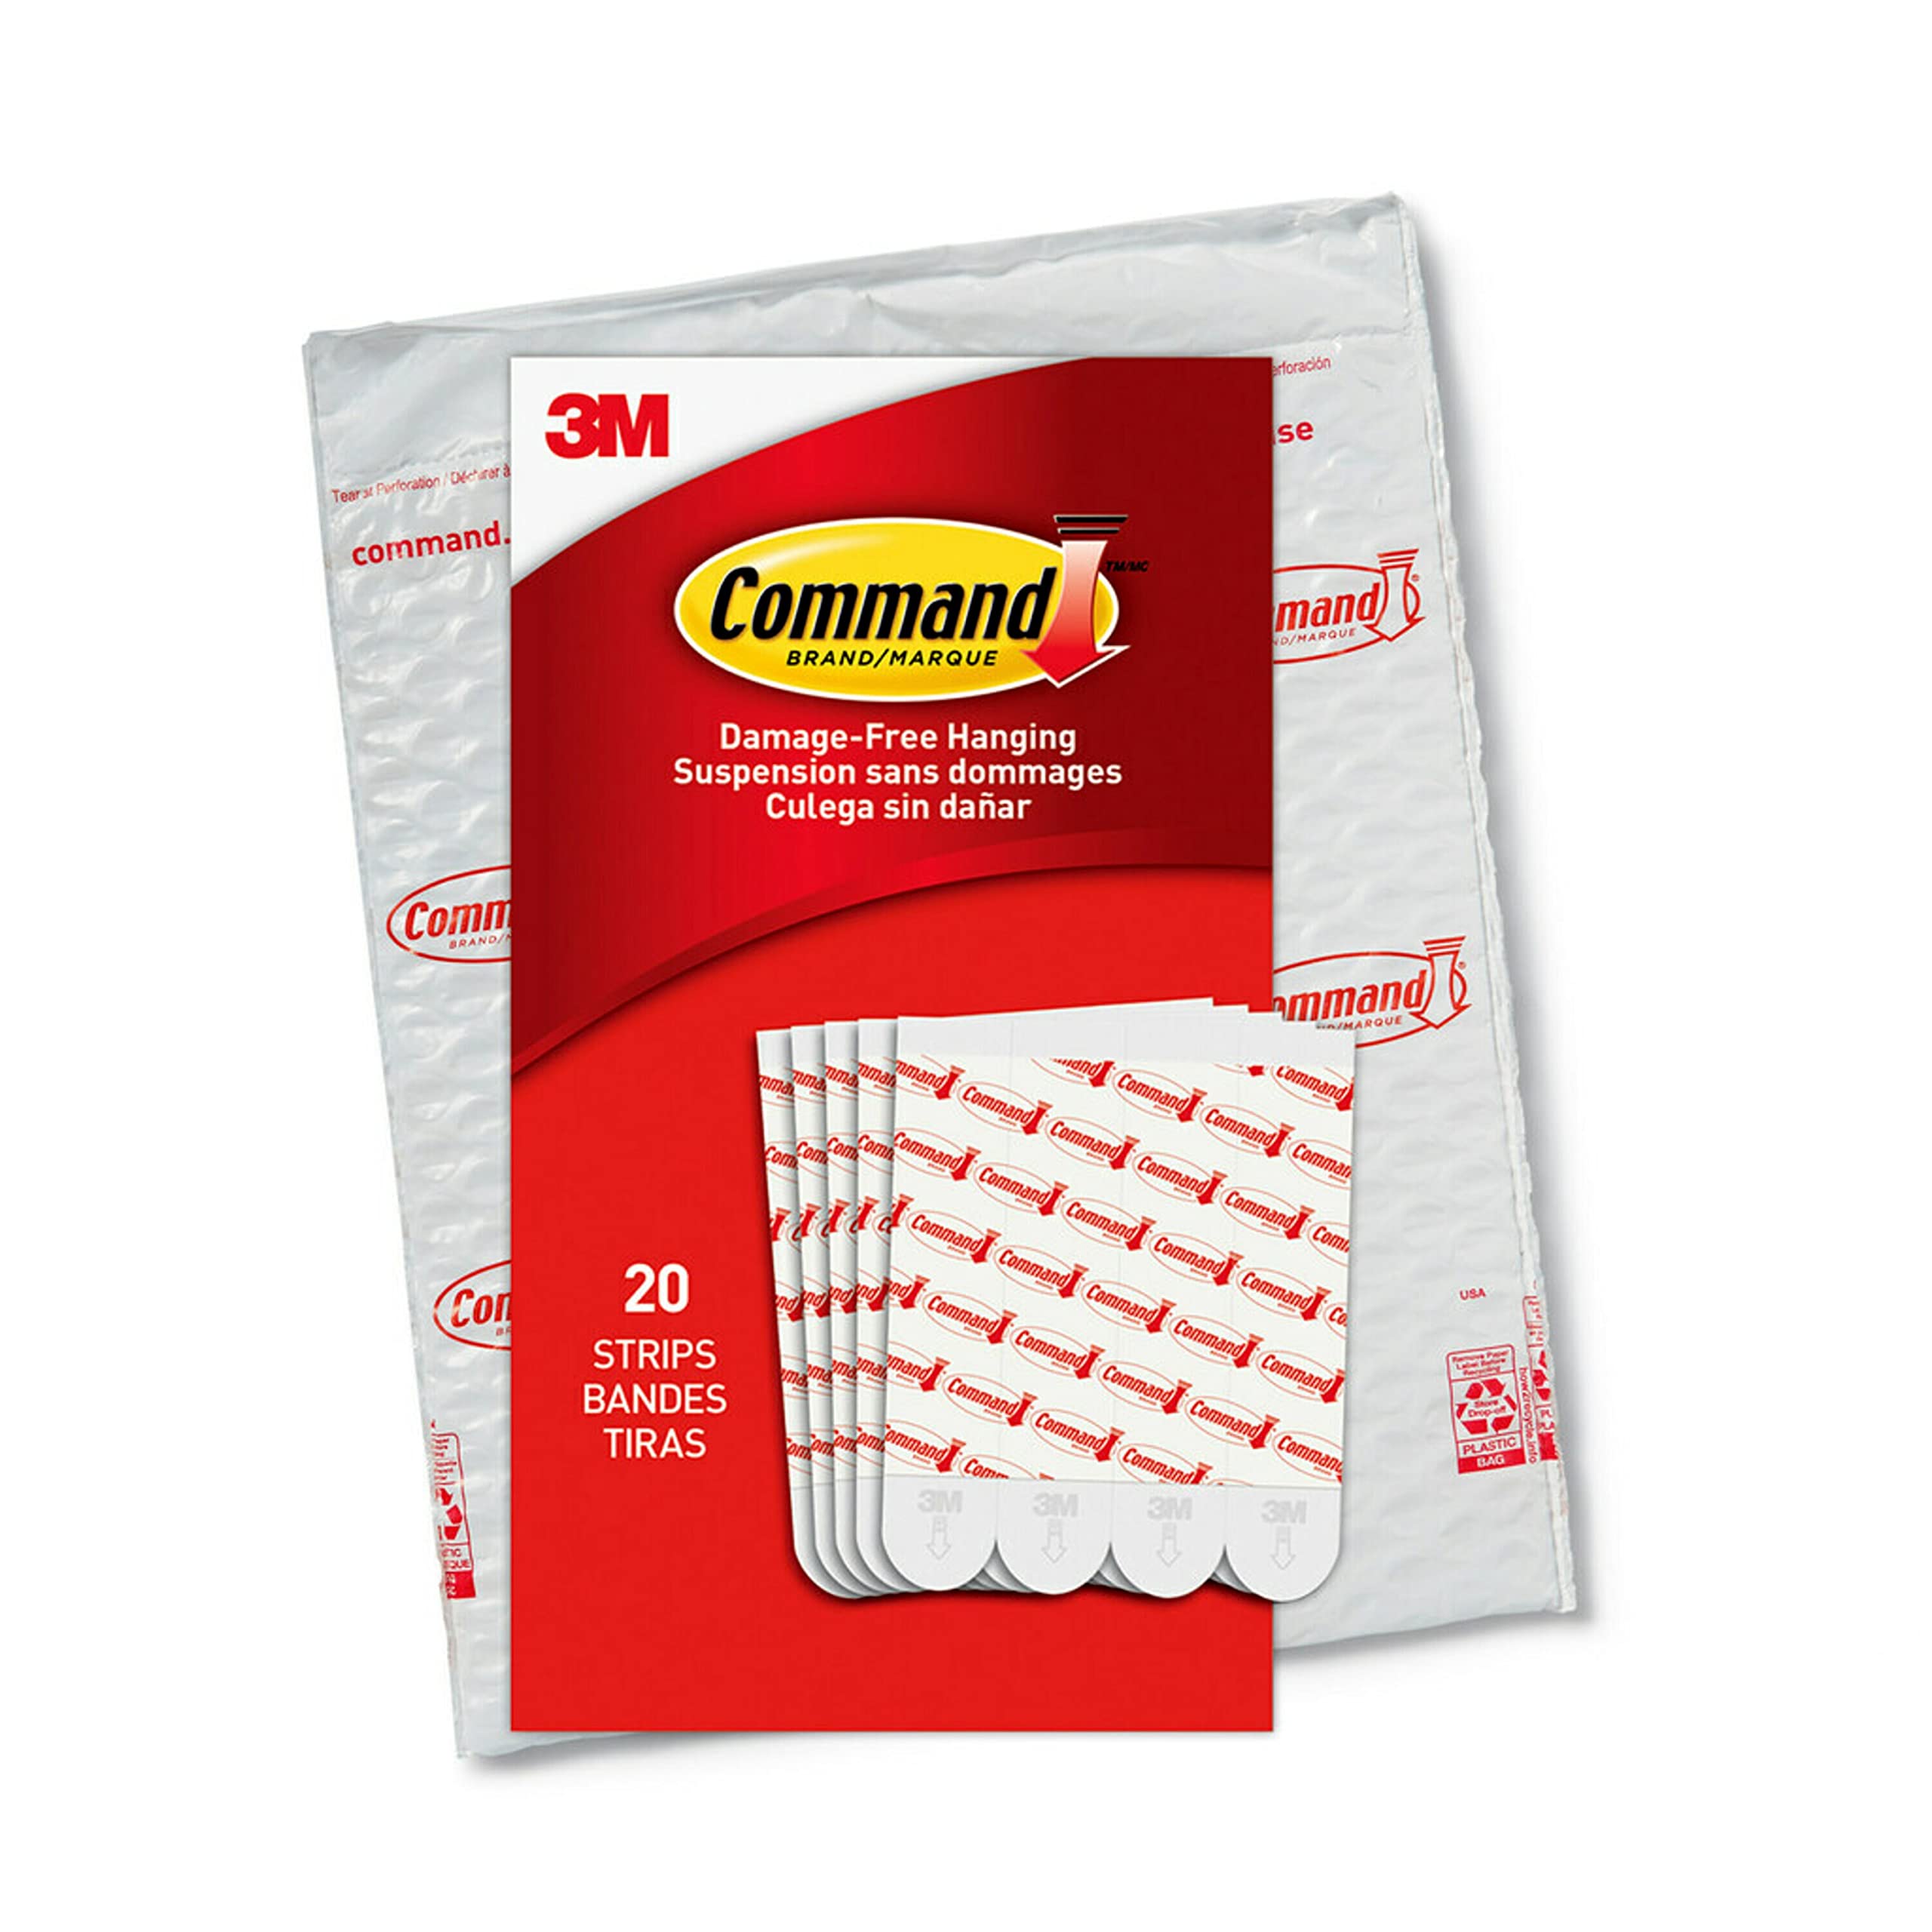 Command Large Refill Adhesive Strips, Damage Free Hanging Wall Adhesive Strips for Large Wall Hooks, No Tools Removable Adhesive Strips to Redecorate and Reorganize Dorm Rooms, 20 White Command Strips